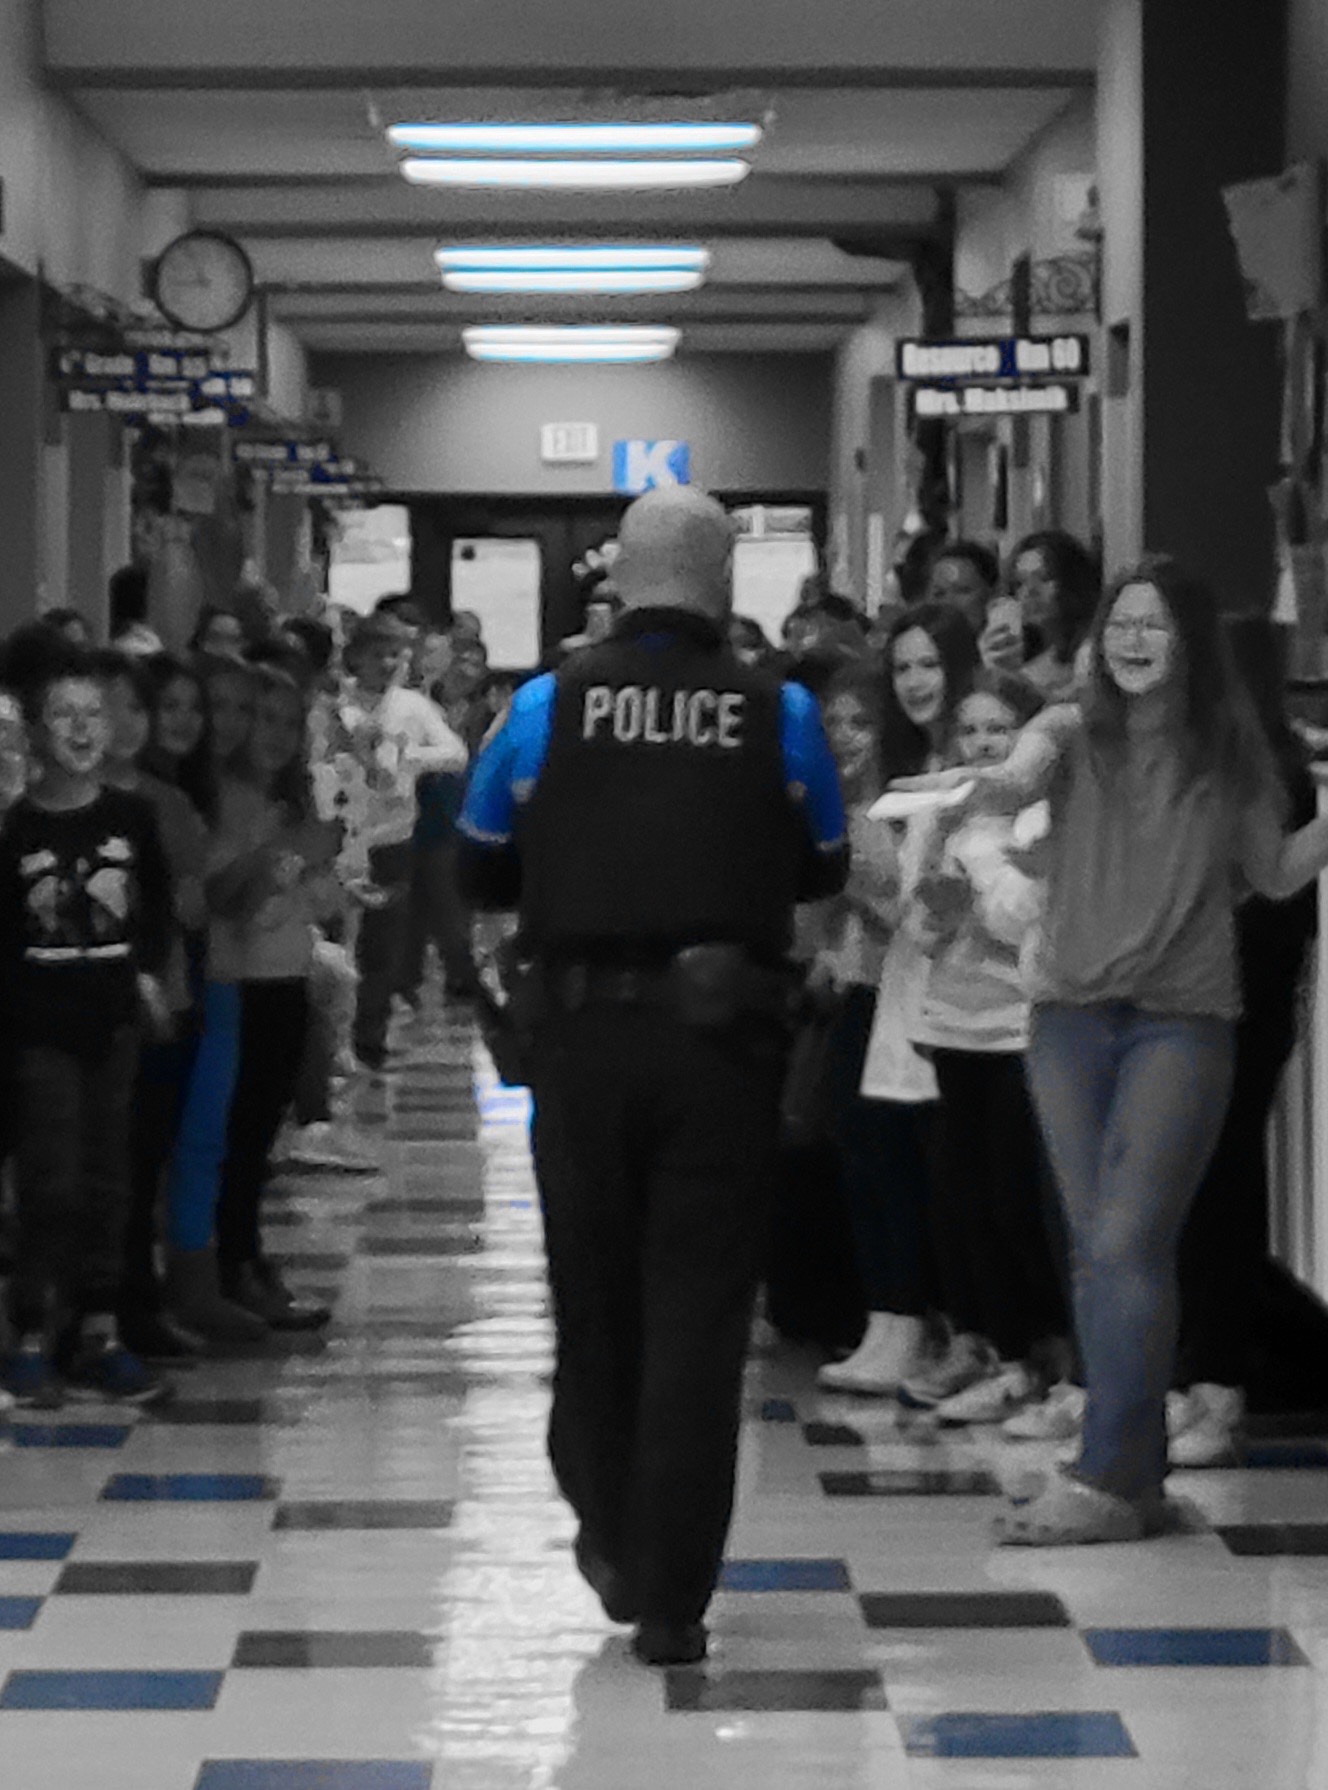 Kolling students bid farewell to Corporal Jerry Patrick, who will be retiring as an LC SRO. Corporal Patrick set the tone for the strong and successful SRO program we have at LC today.